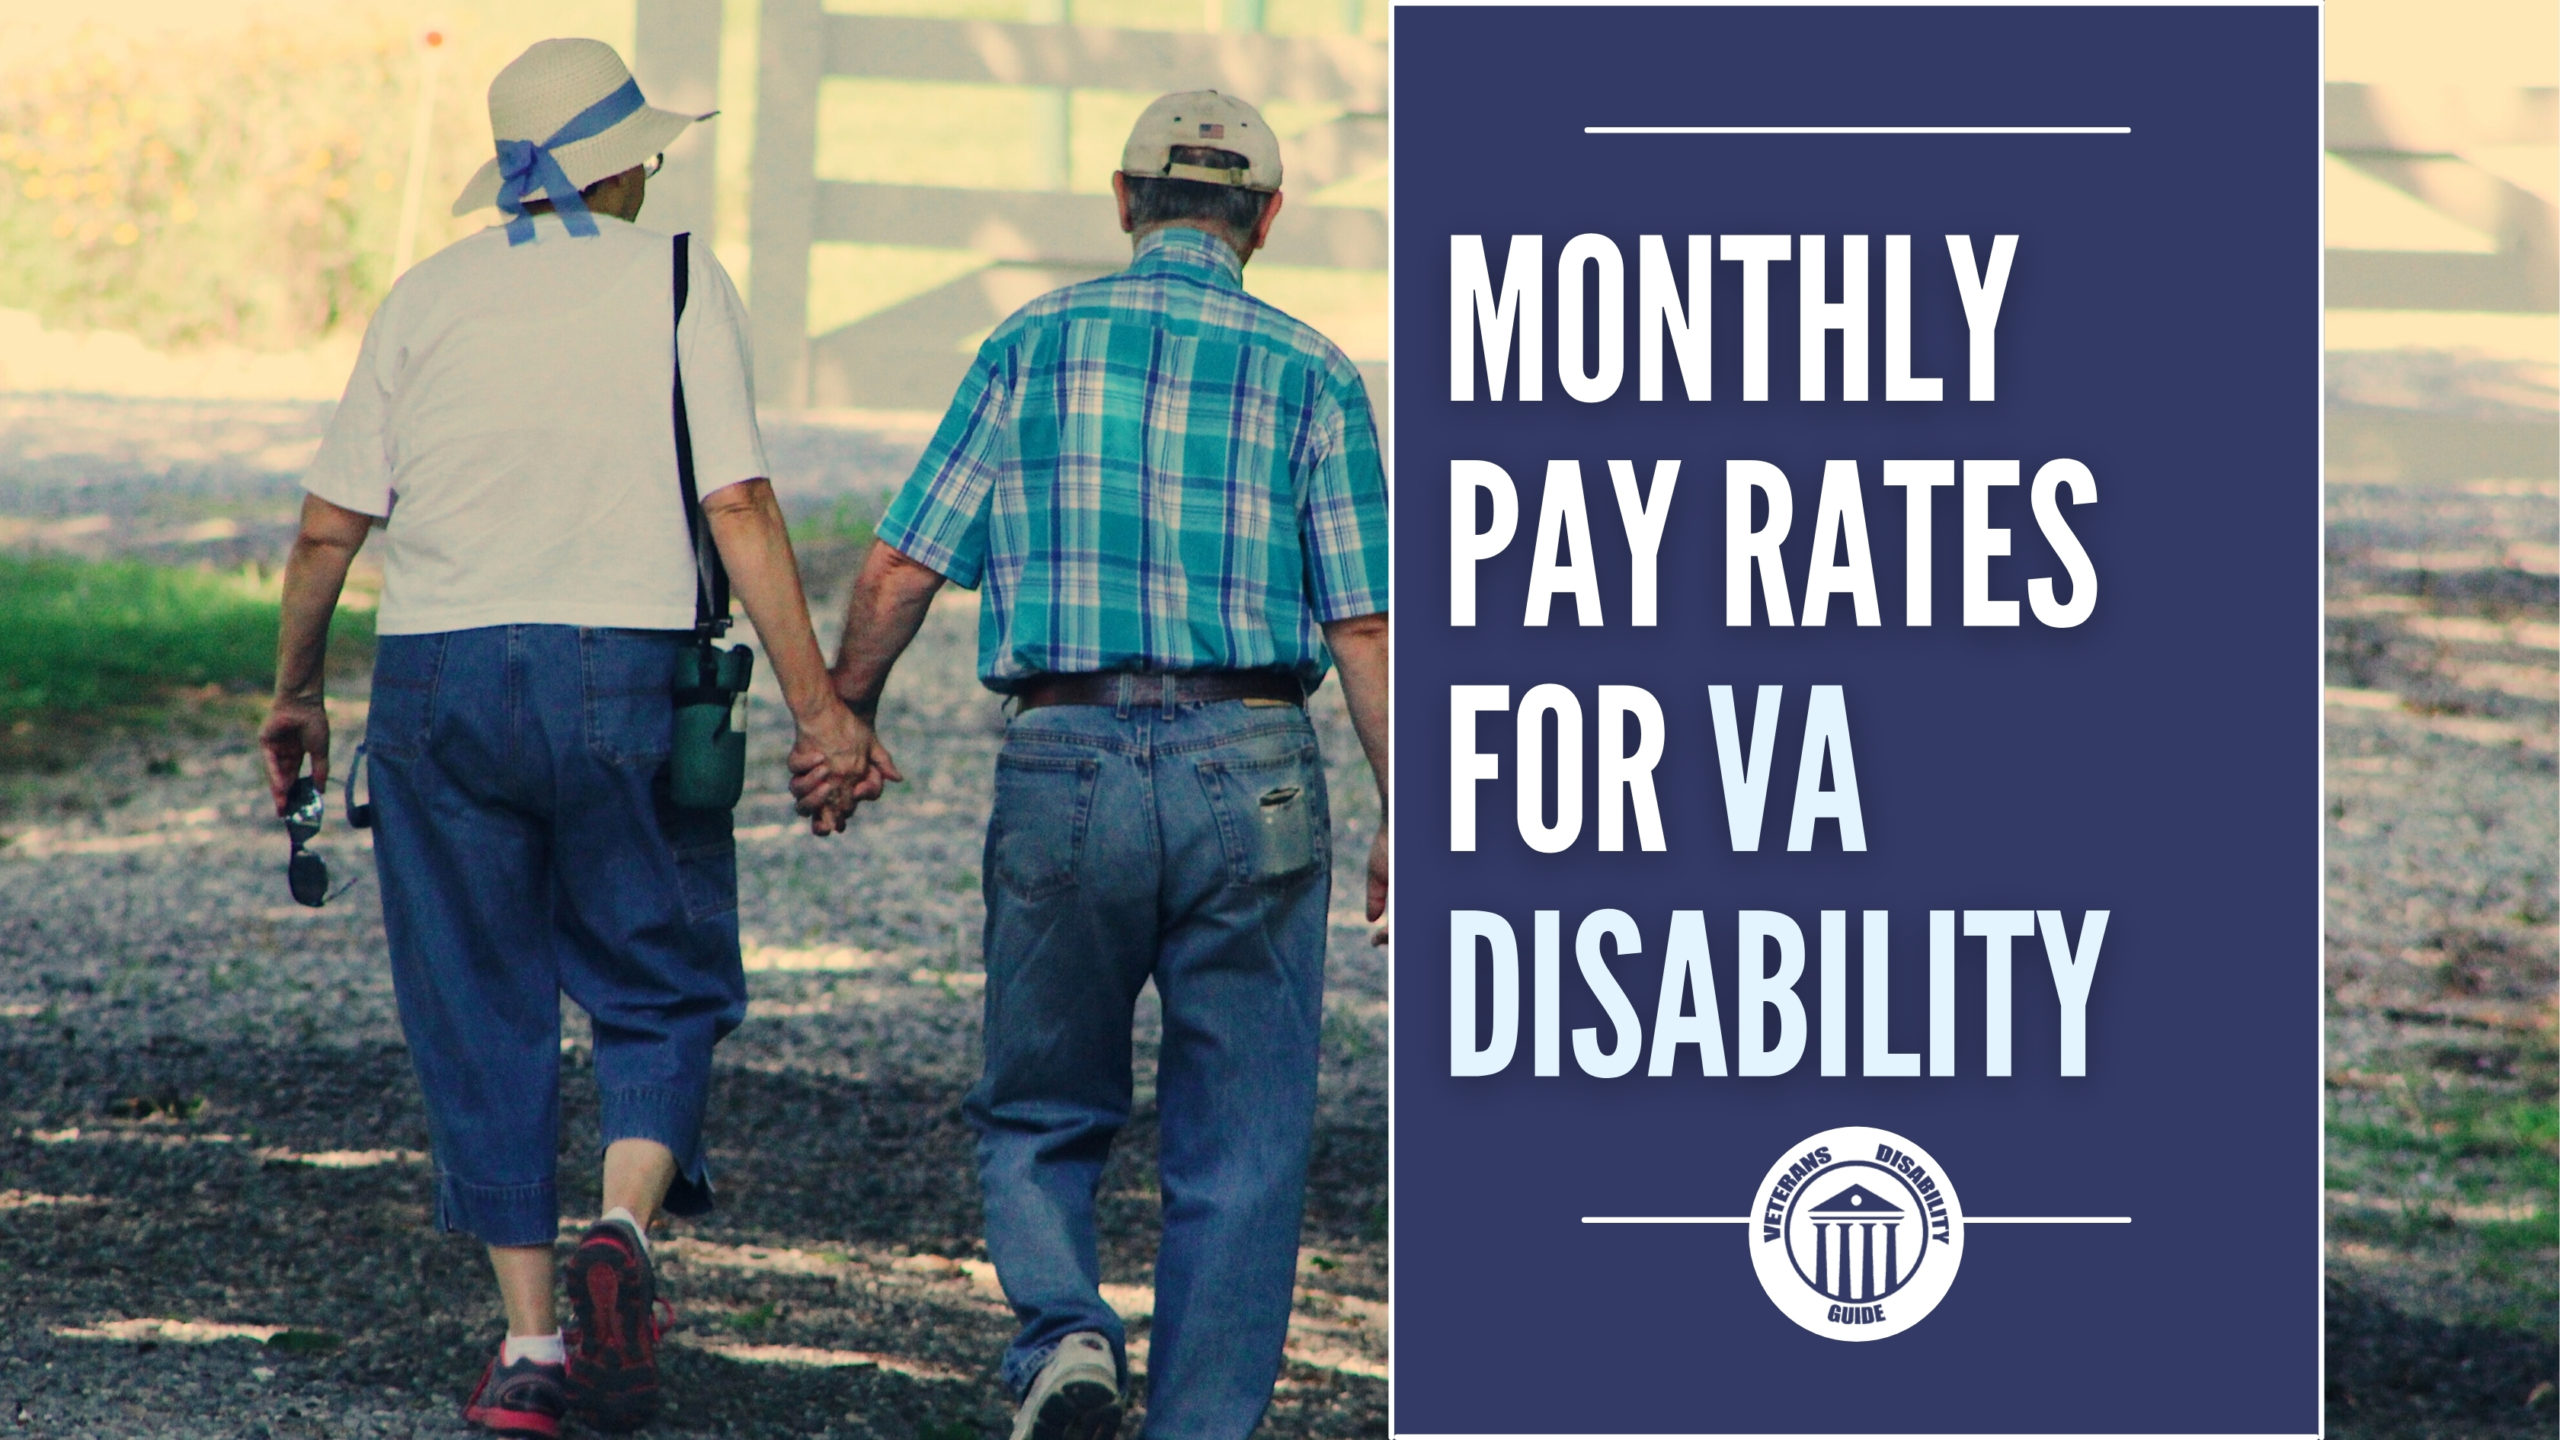 Monthly Pay Rates for VA Disability Blog Header Image